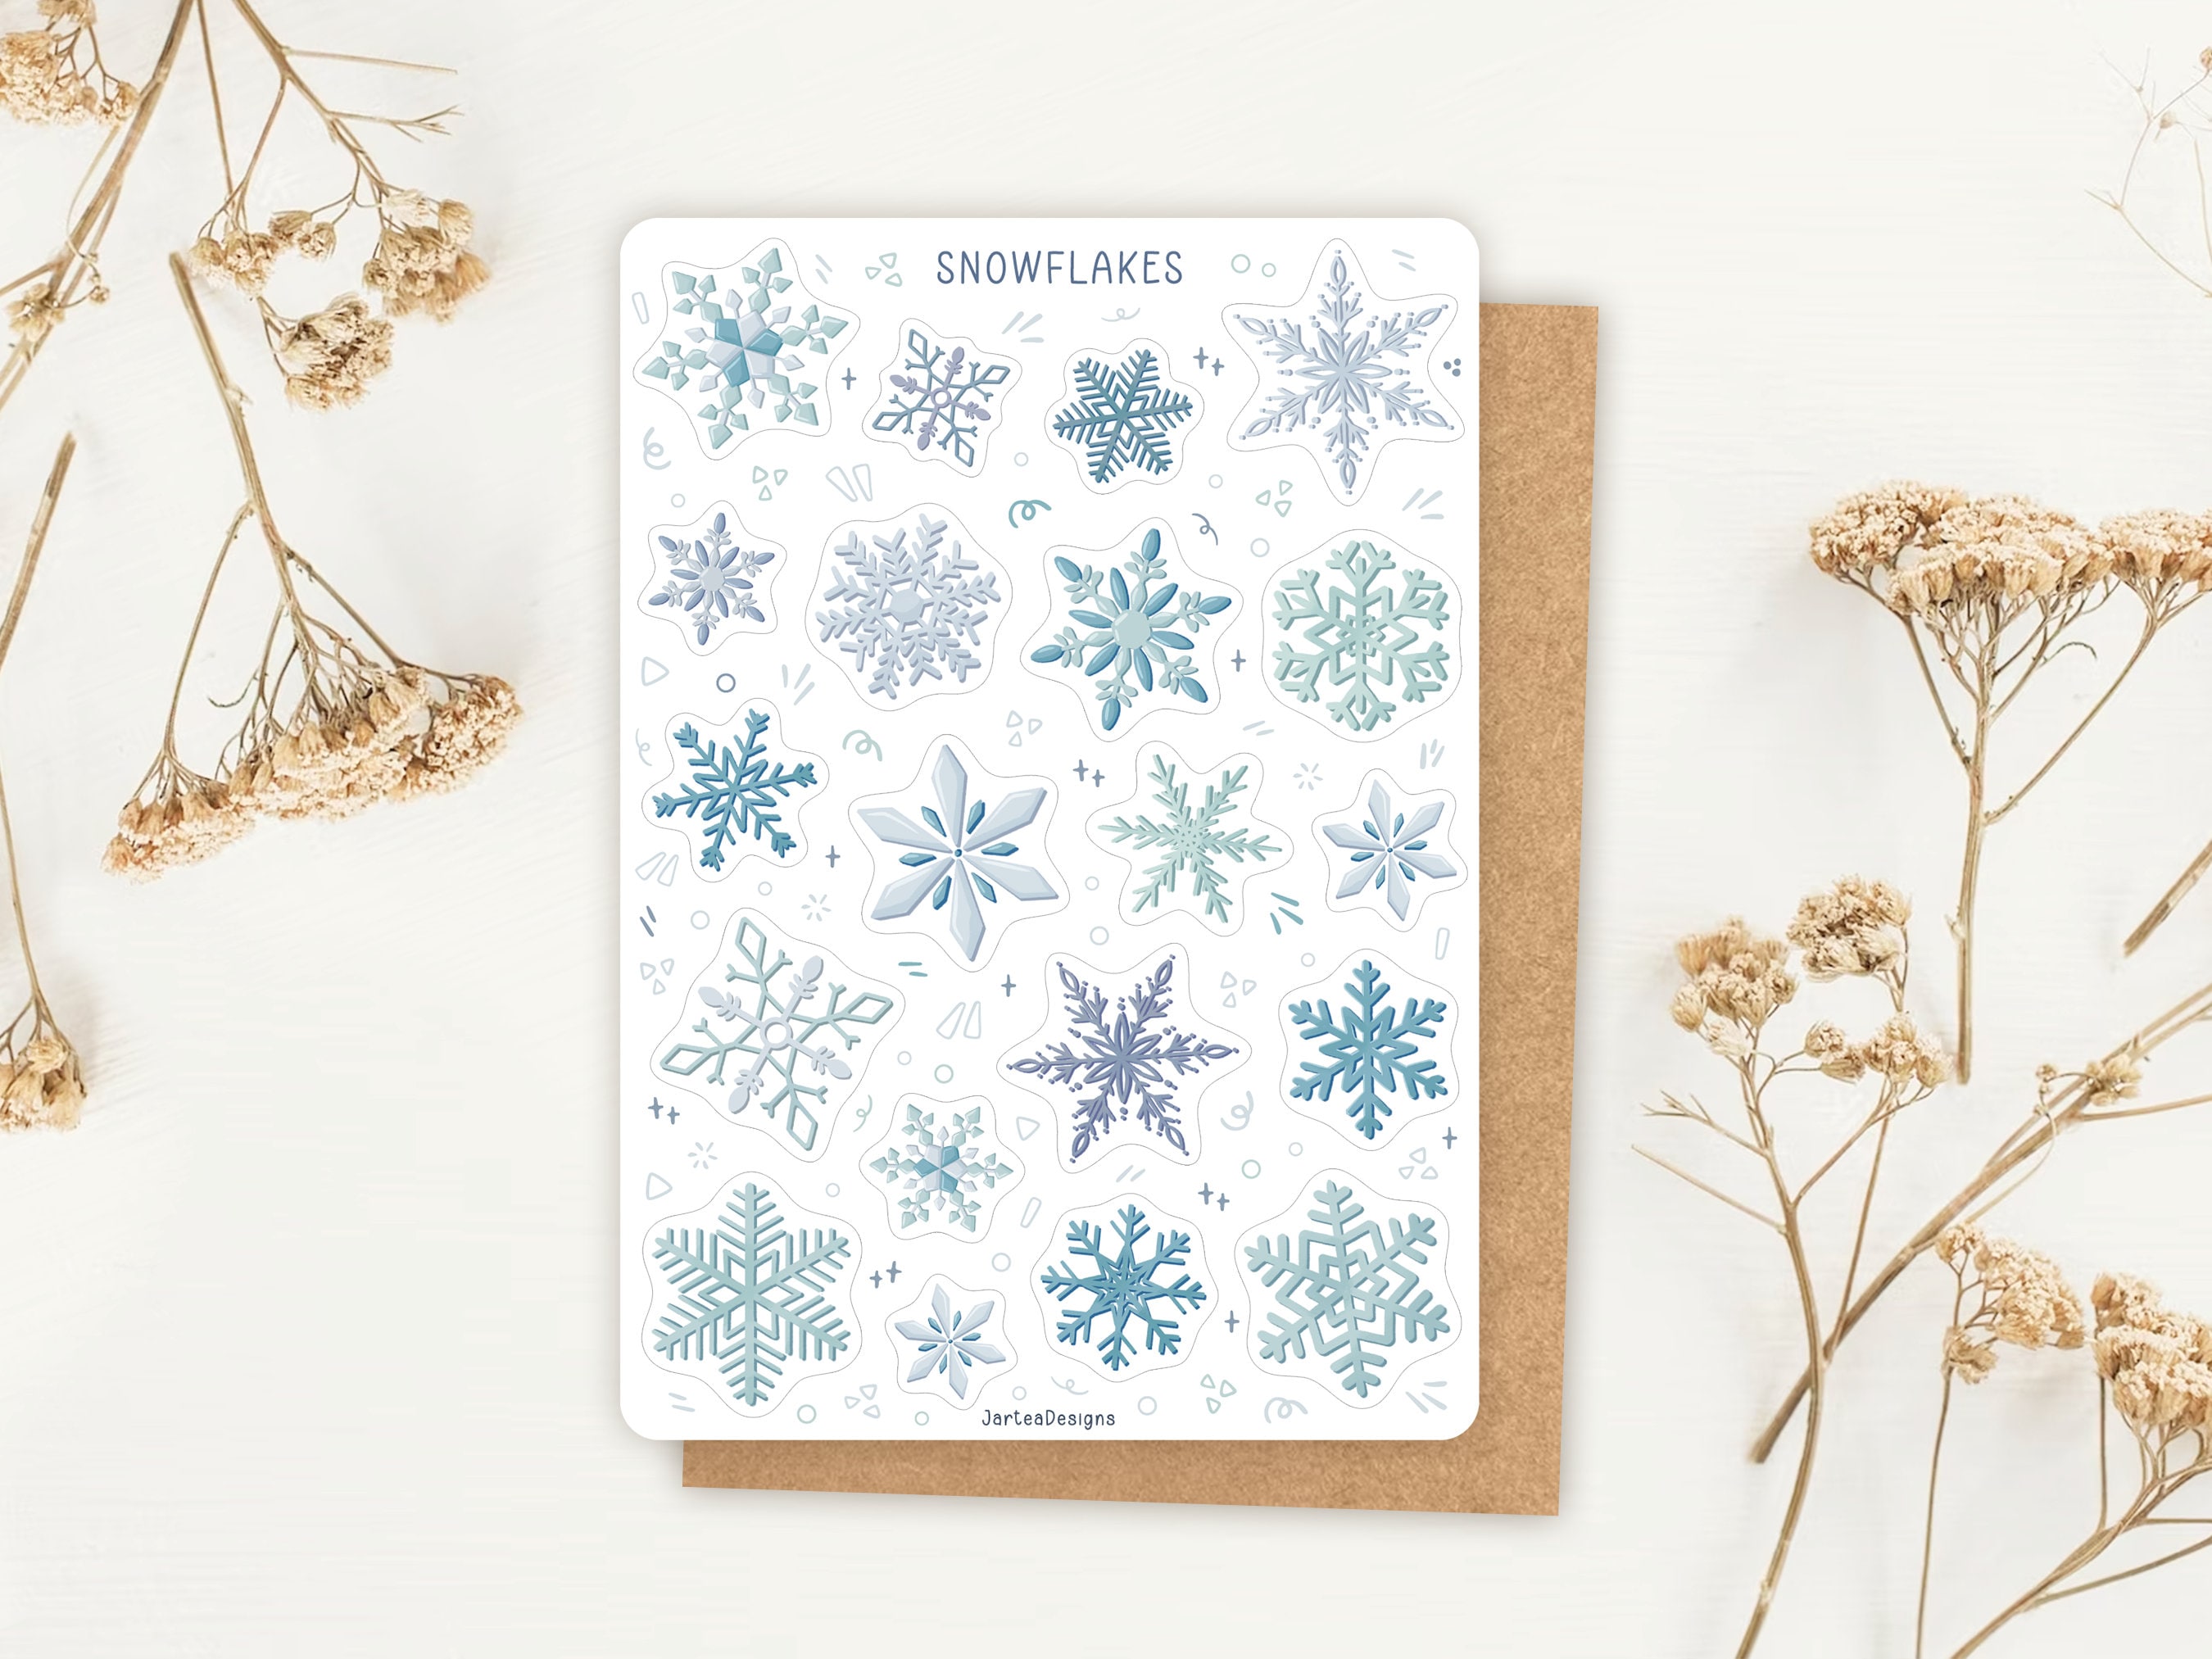 Snowflake hand carved rubber stamp / christmas stamps / snowflakes stamp/  stamp set/ diy christmas decor